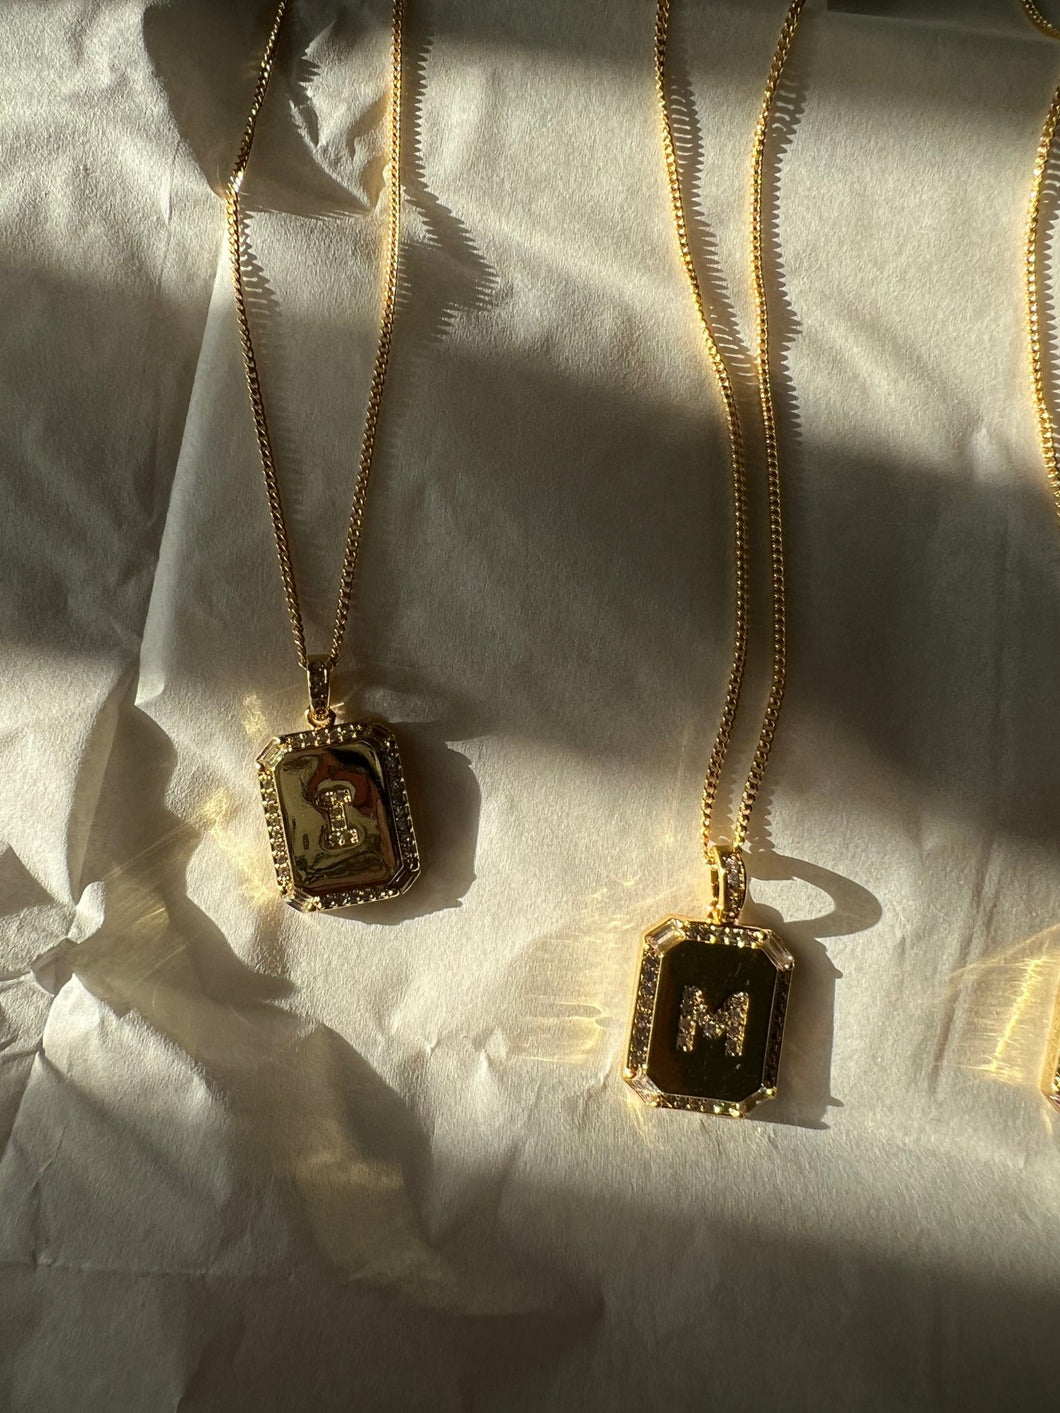 Initial Necklaces - PrettynGoldd